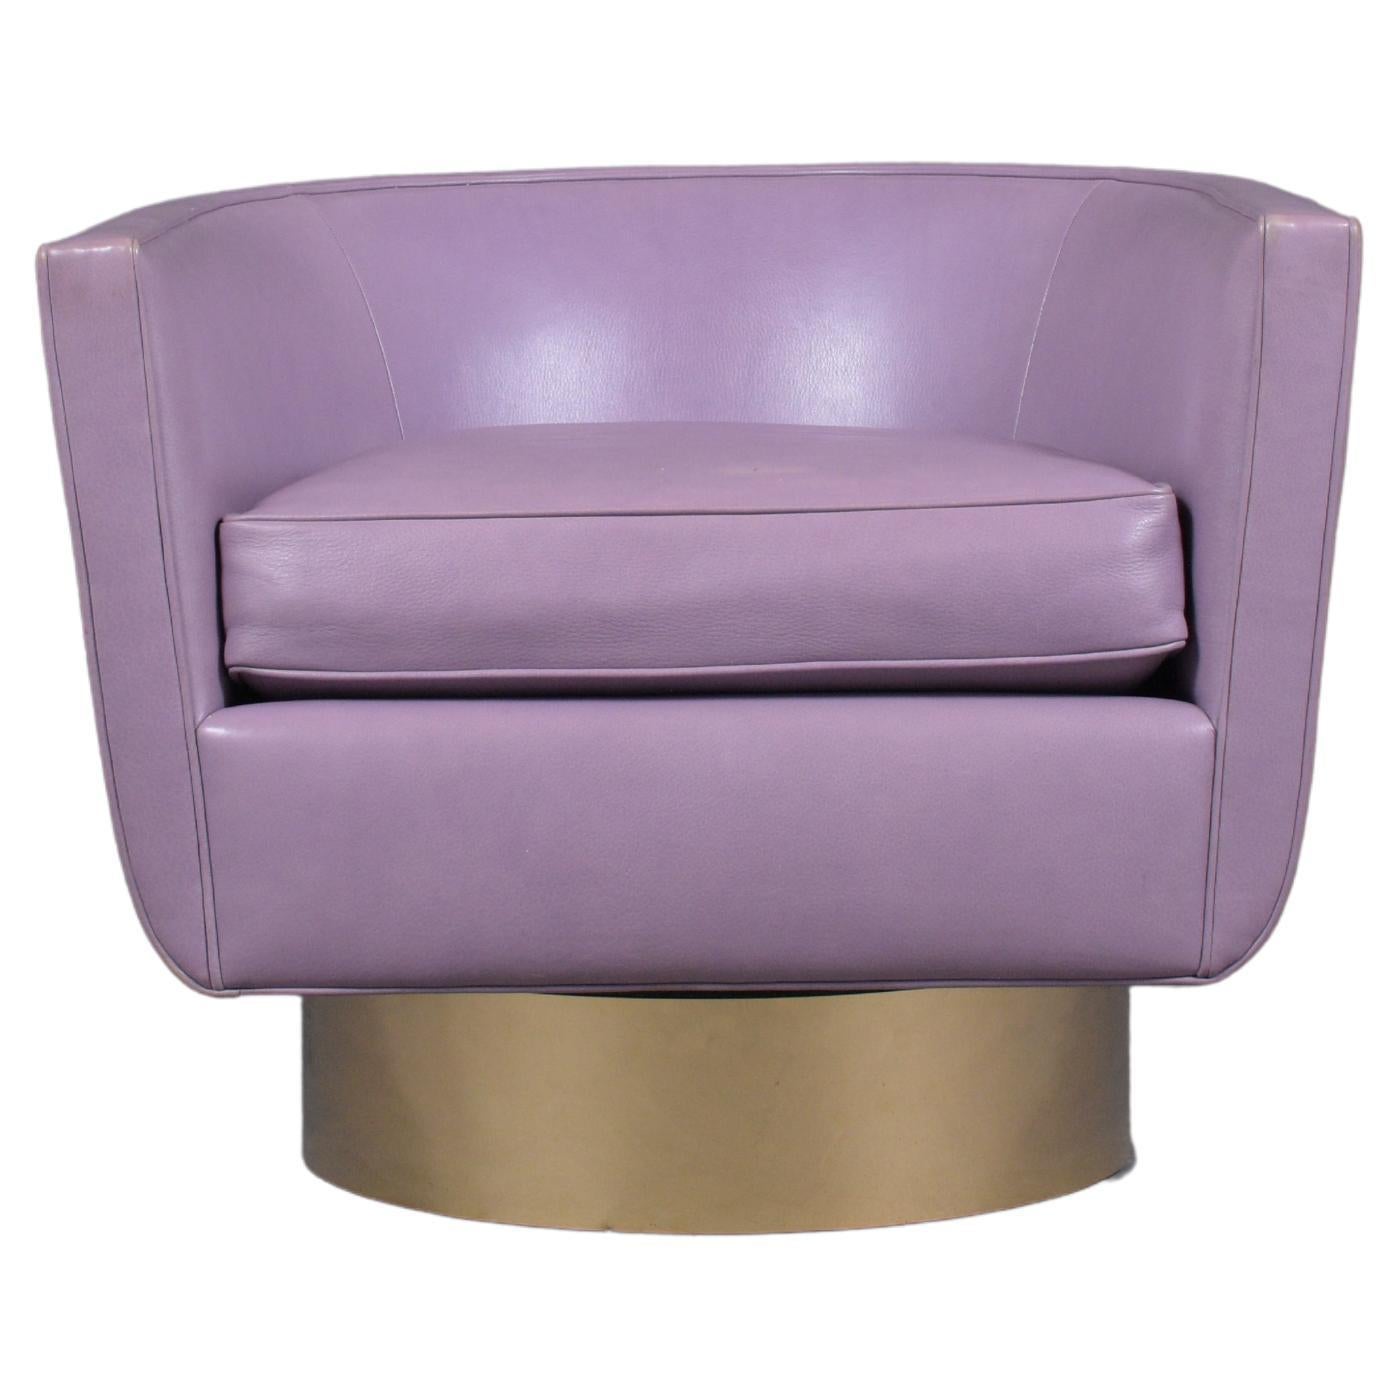 Restored Mid-Century Brass Swivel Chair in Violet Leather - Modern Elegance For Sale